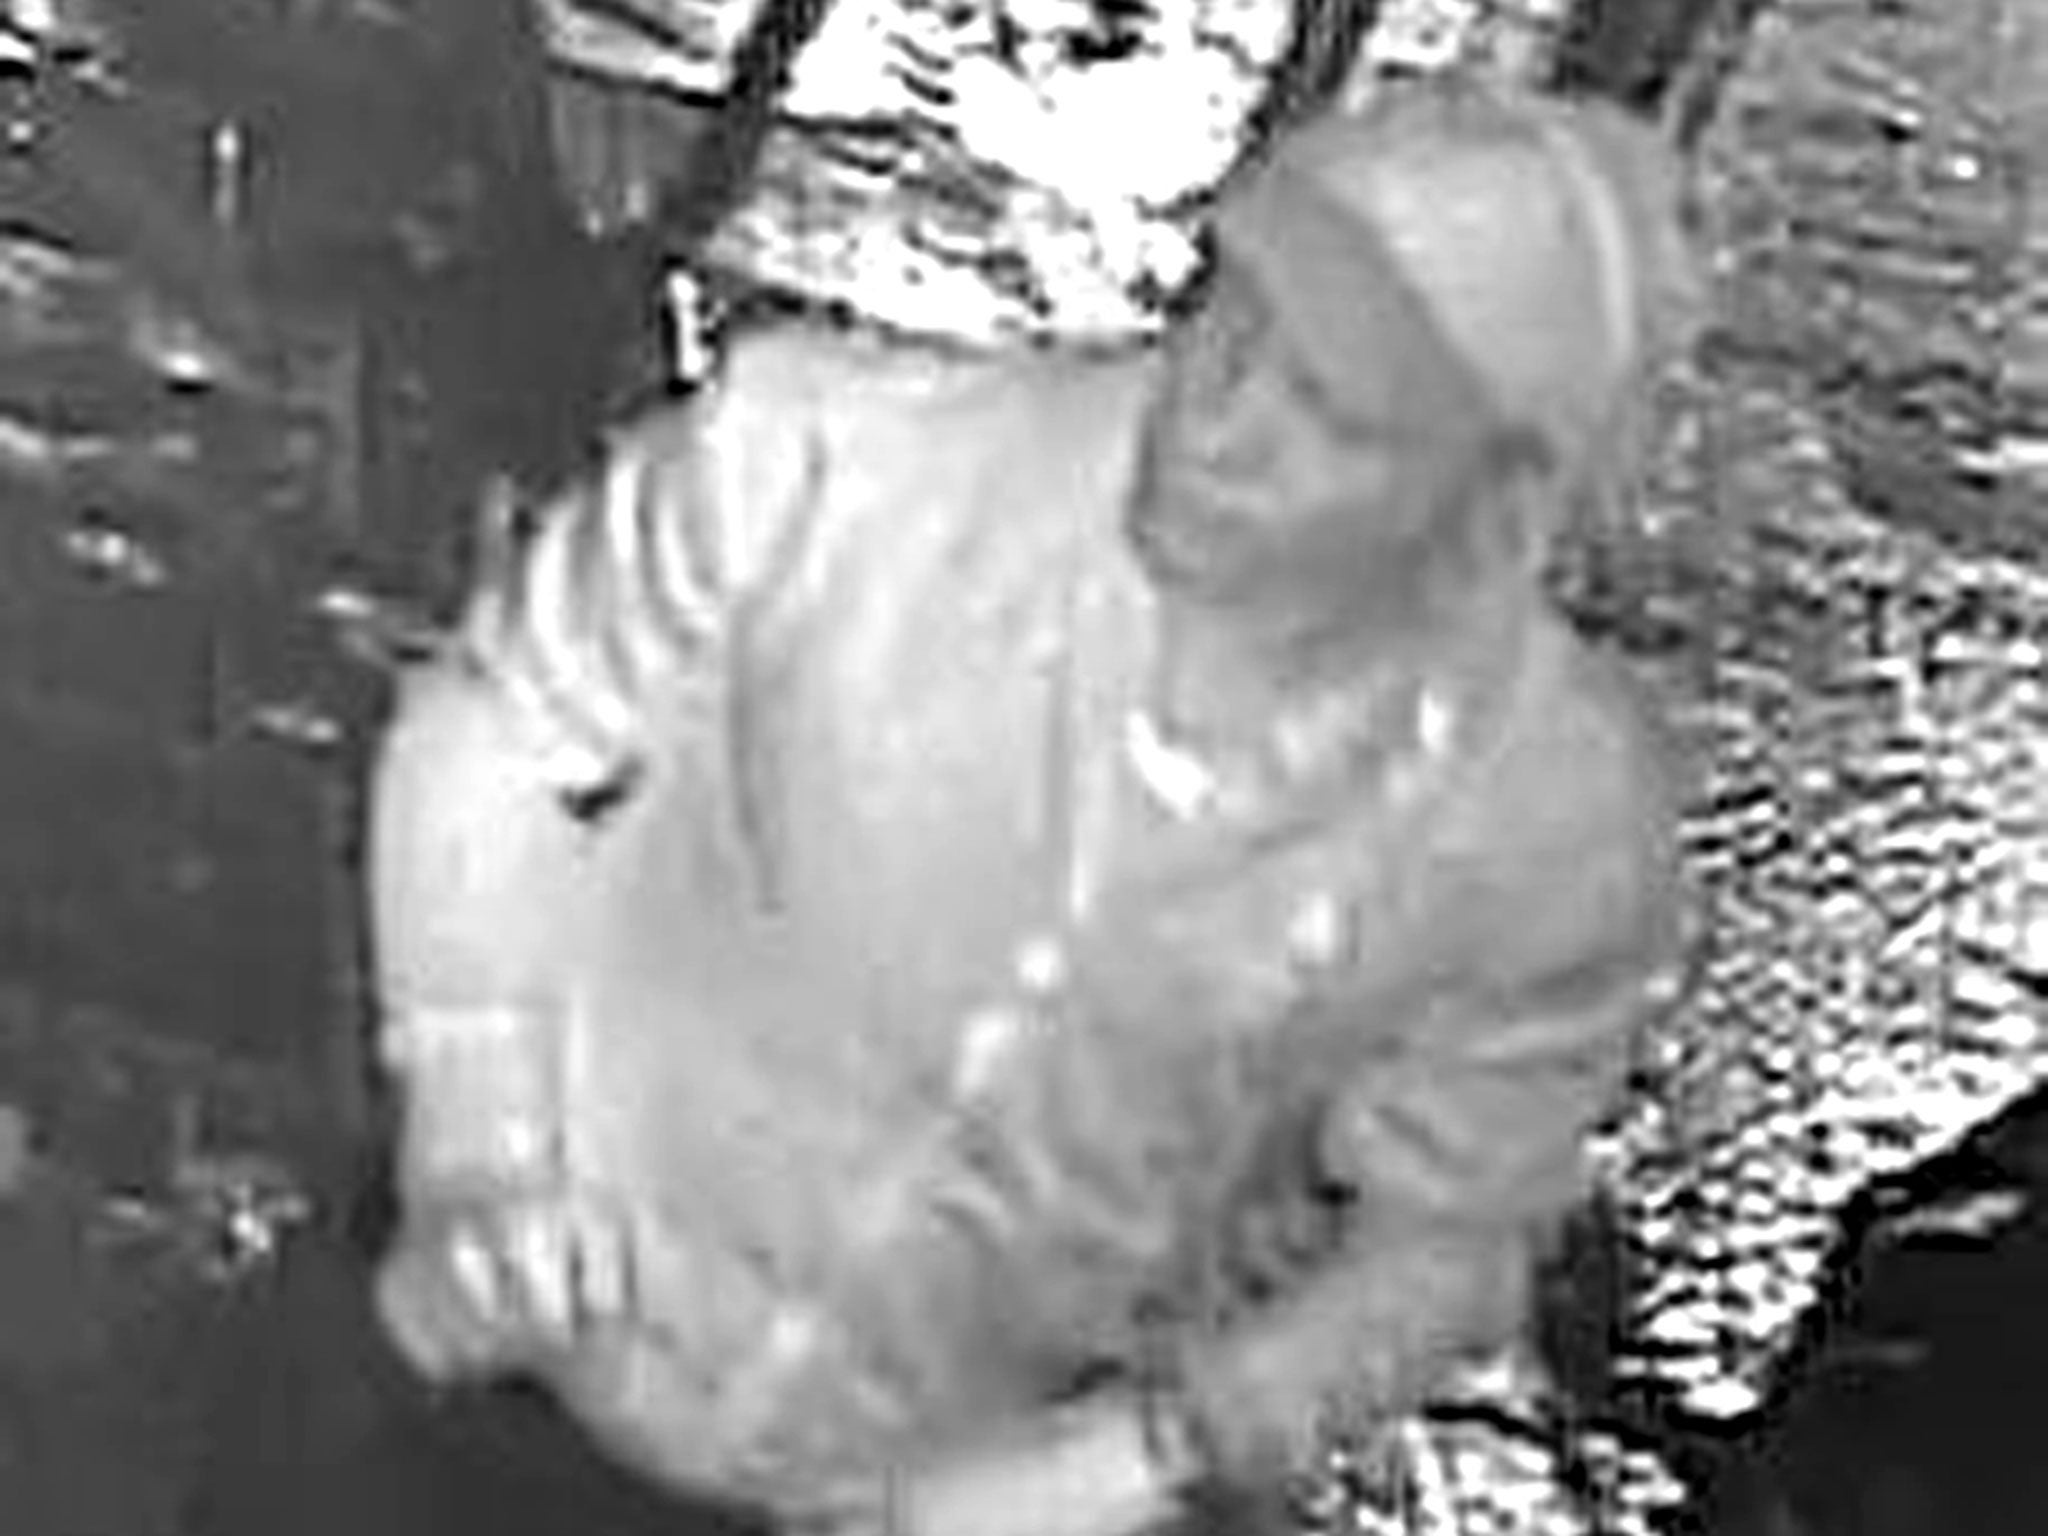 Police released this image of a man suspected of an arson attack on a London mosque